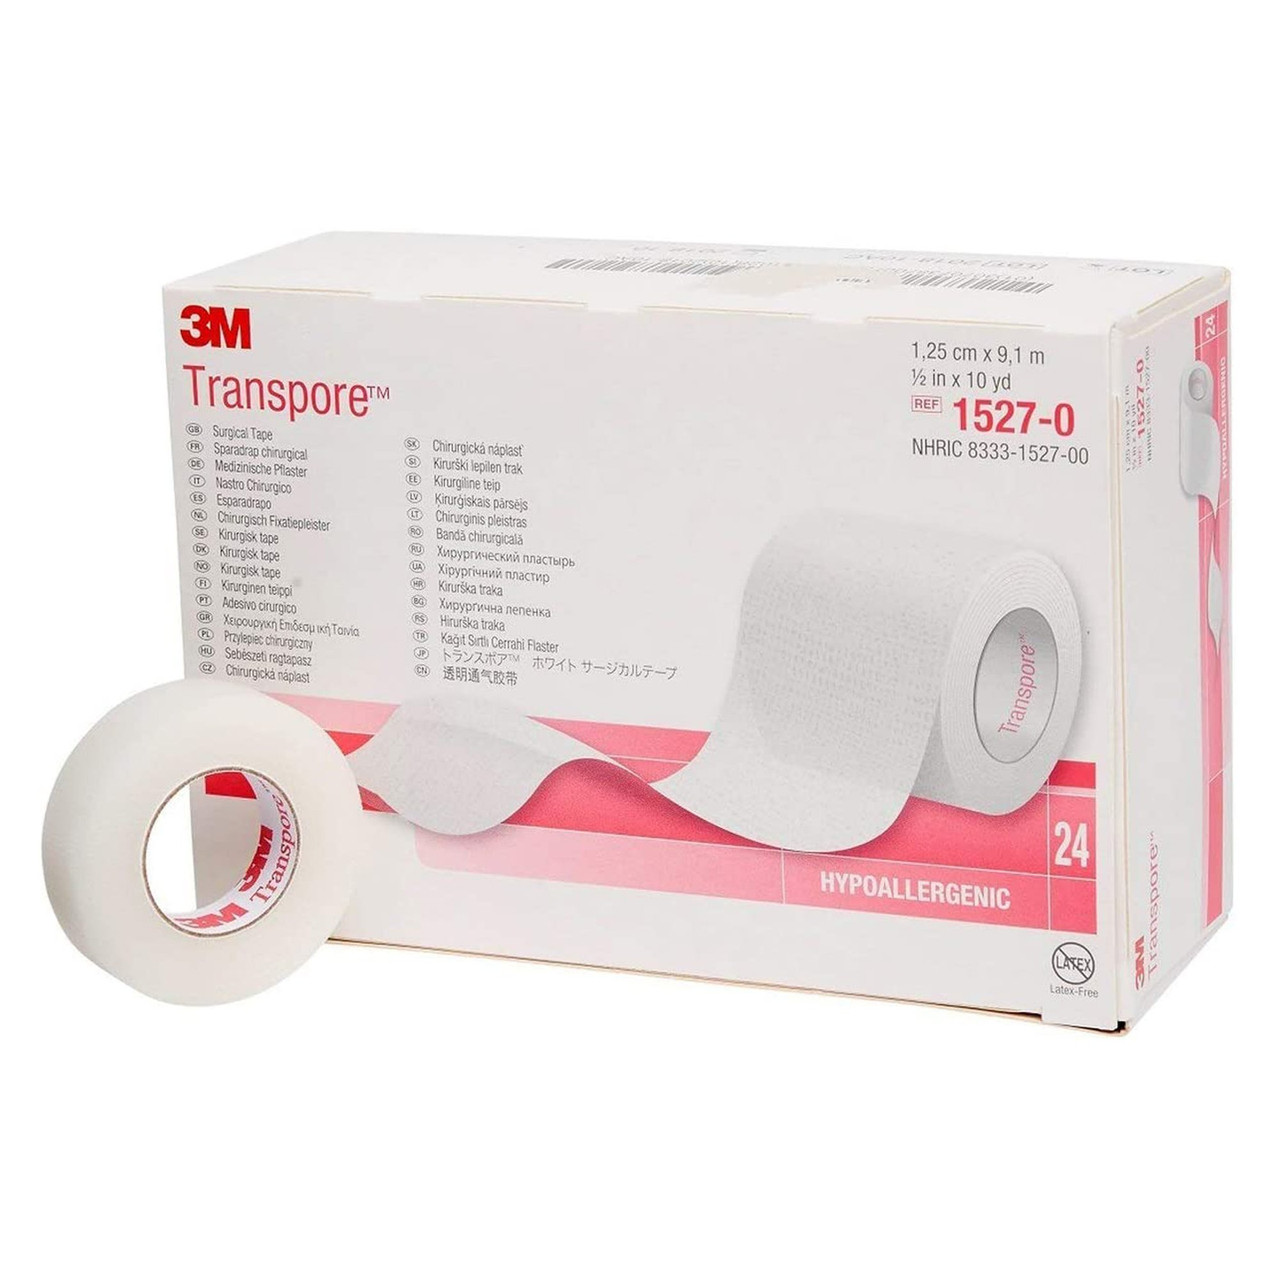 3M Micropore Plus High Adhesion Paper Surgical Tape - 1 Inch x 1-1/2 Yard